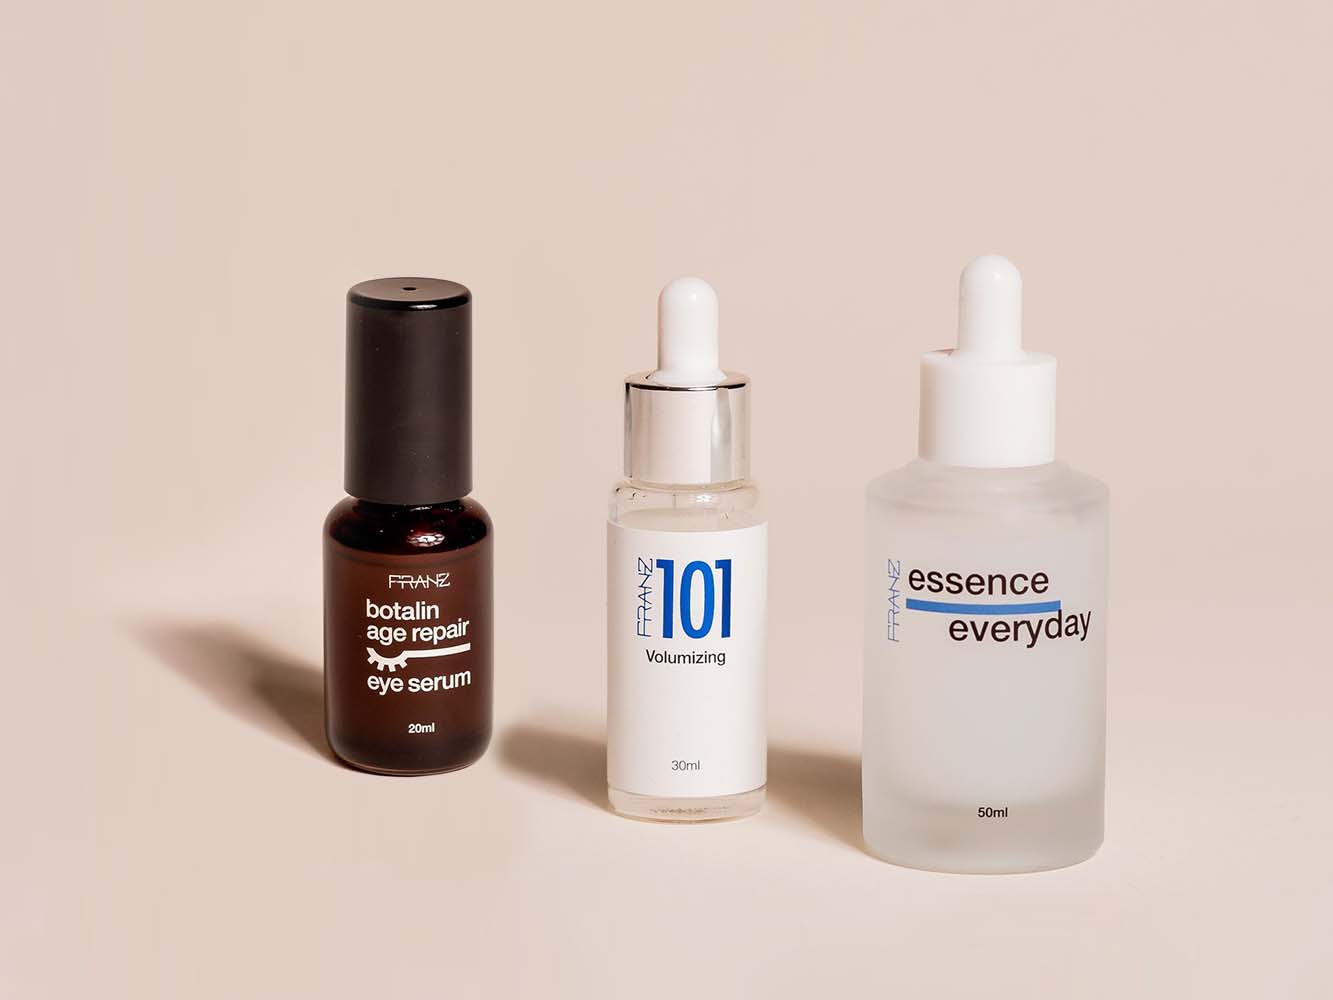 How to Choose the Best Face Serum for Your Skincare Routine